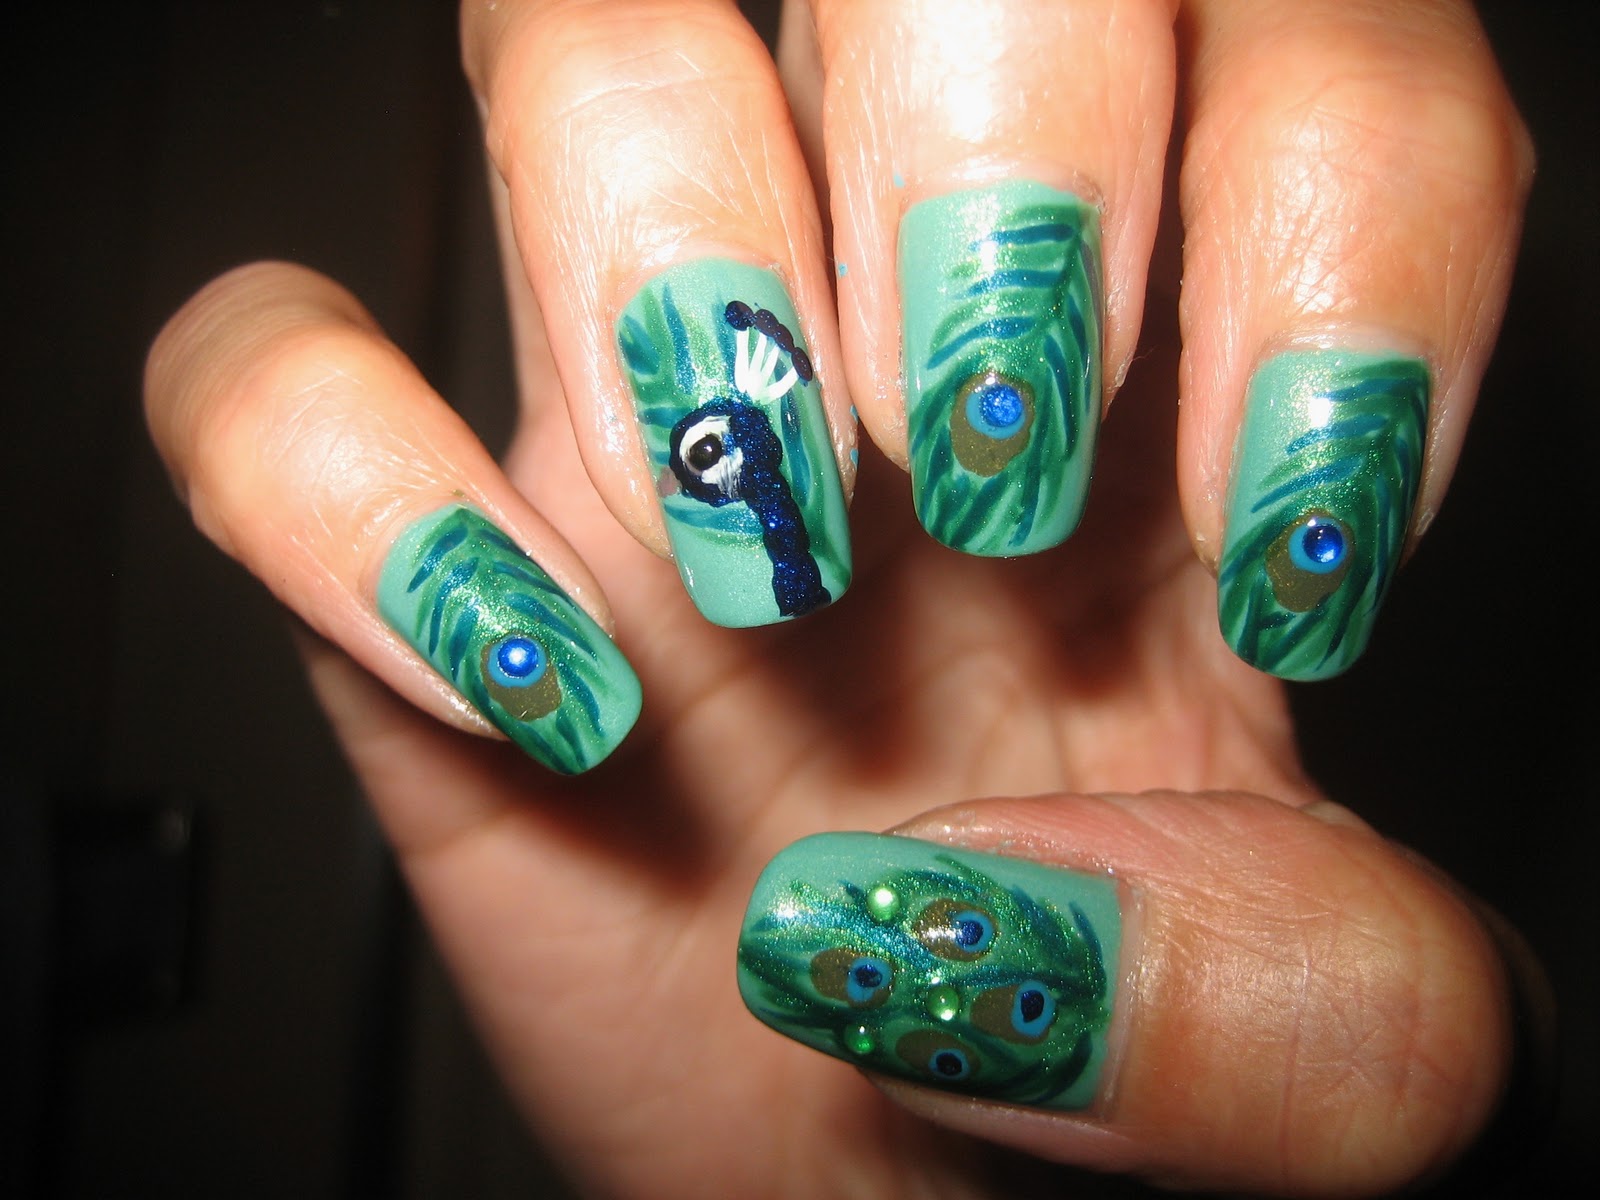 Awesome Nails By Nicole: My Most Awesome Design Yet!